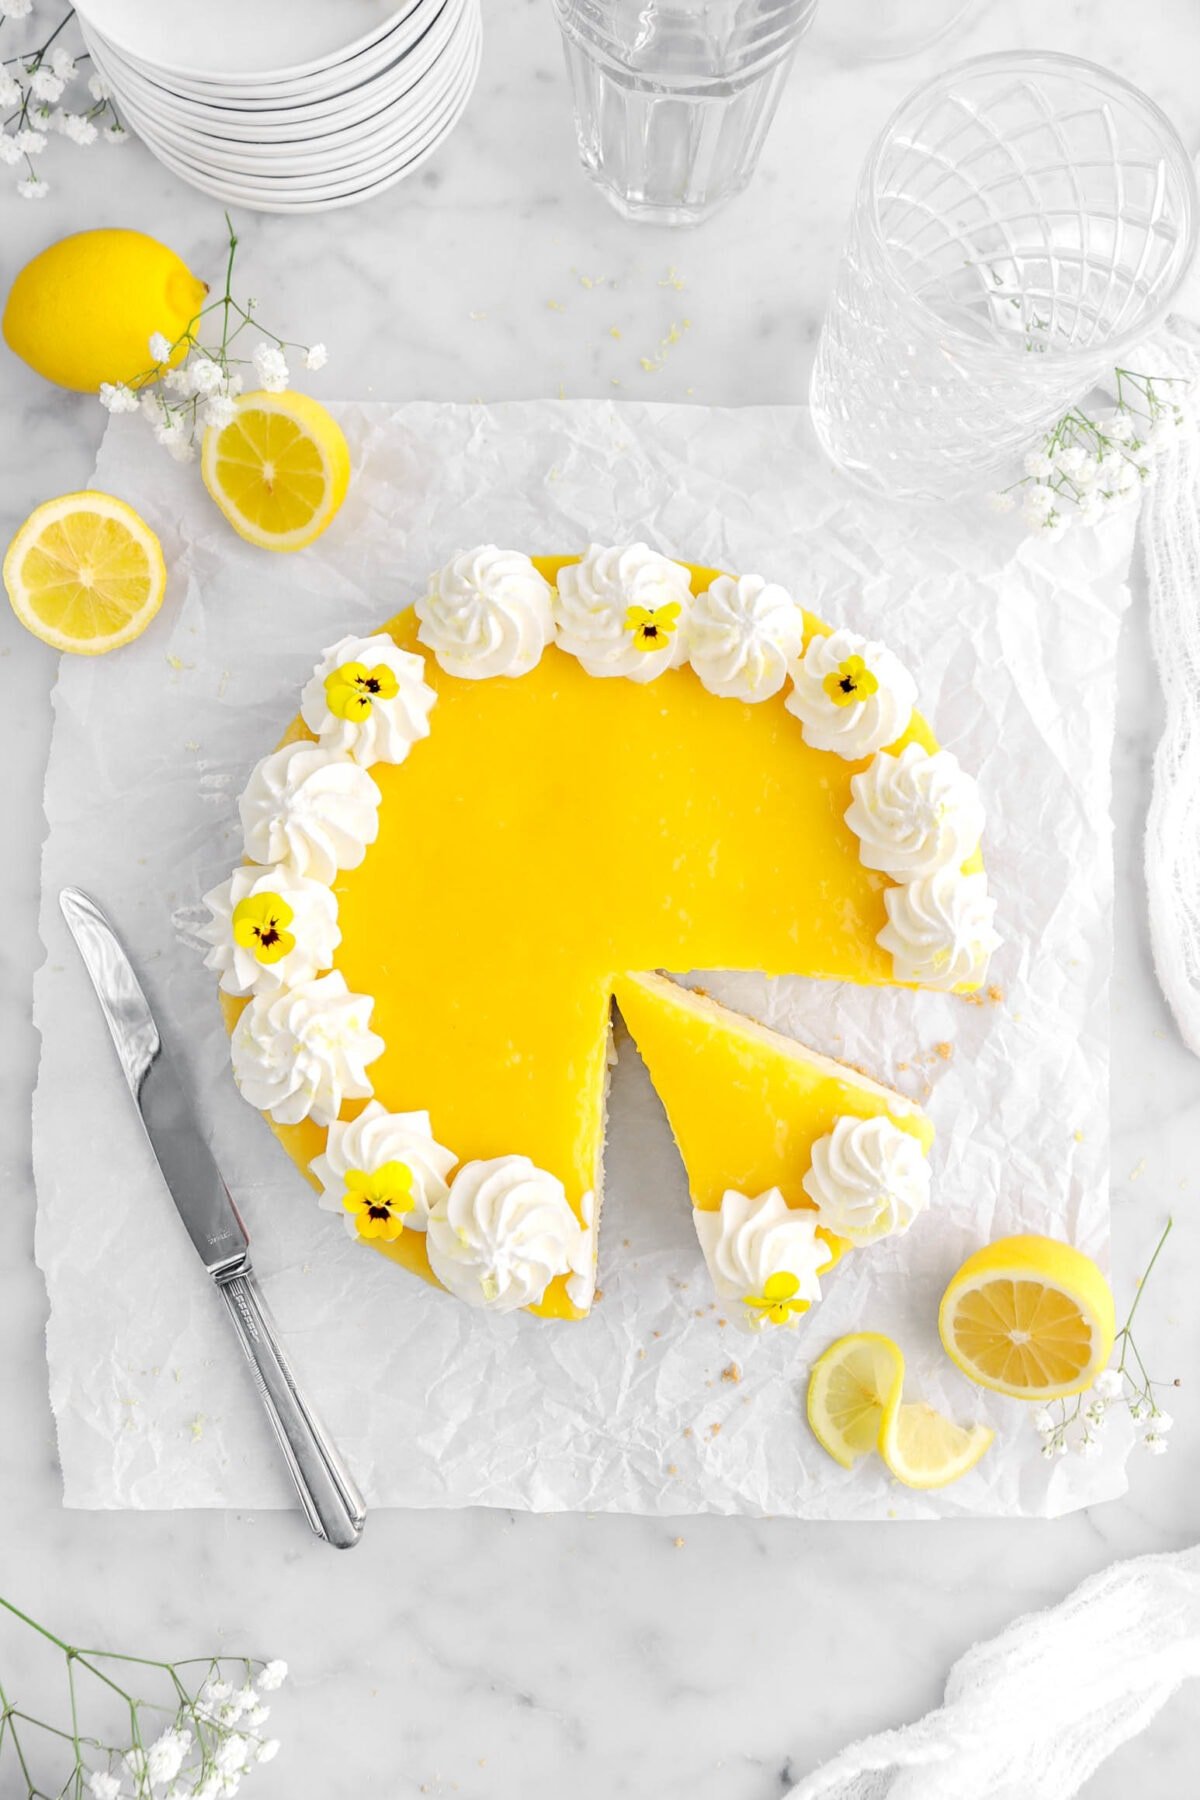 overhead shot of lemon cheesecake with slice cut into it on parchment paper, with lemons, flowers, and a knife beside.